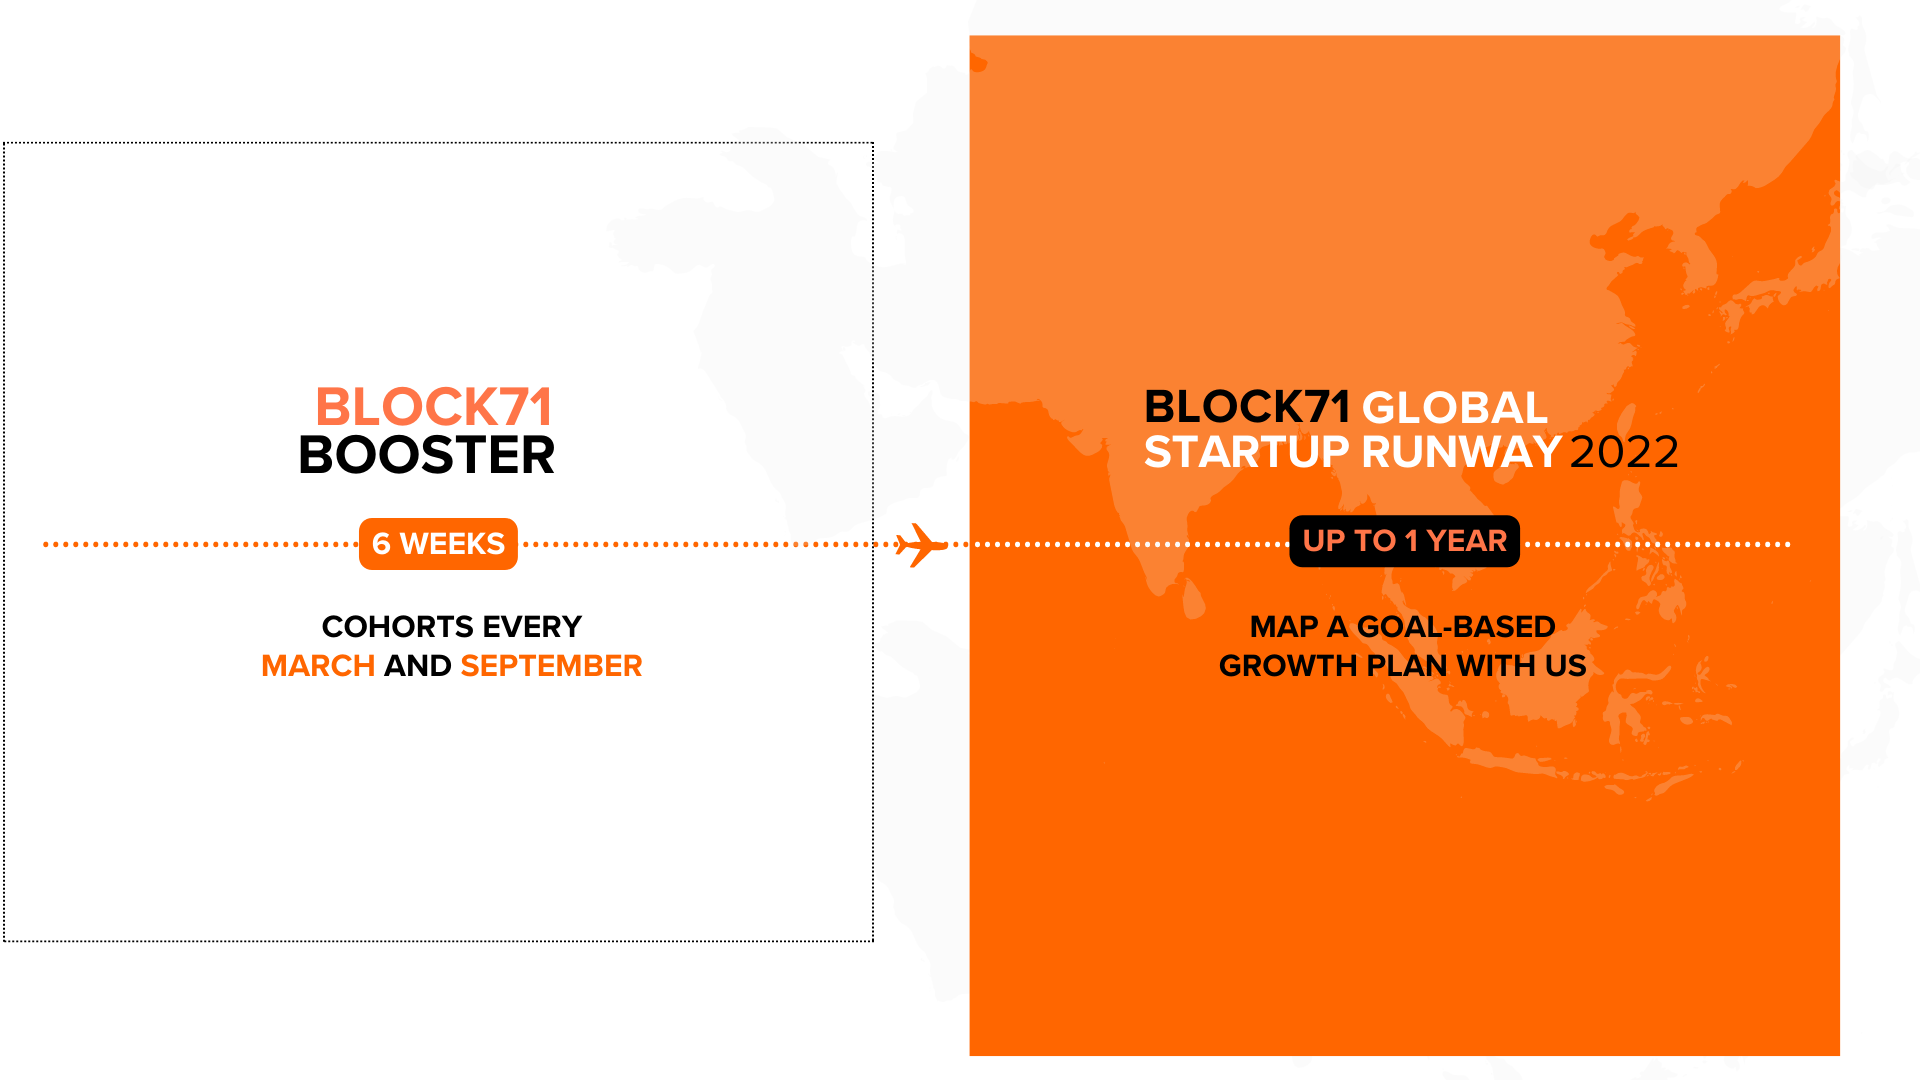 Booster to Global Startup Runway